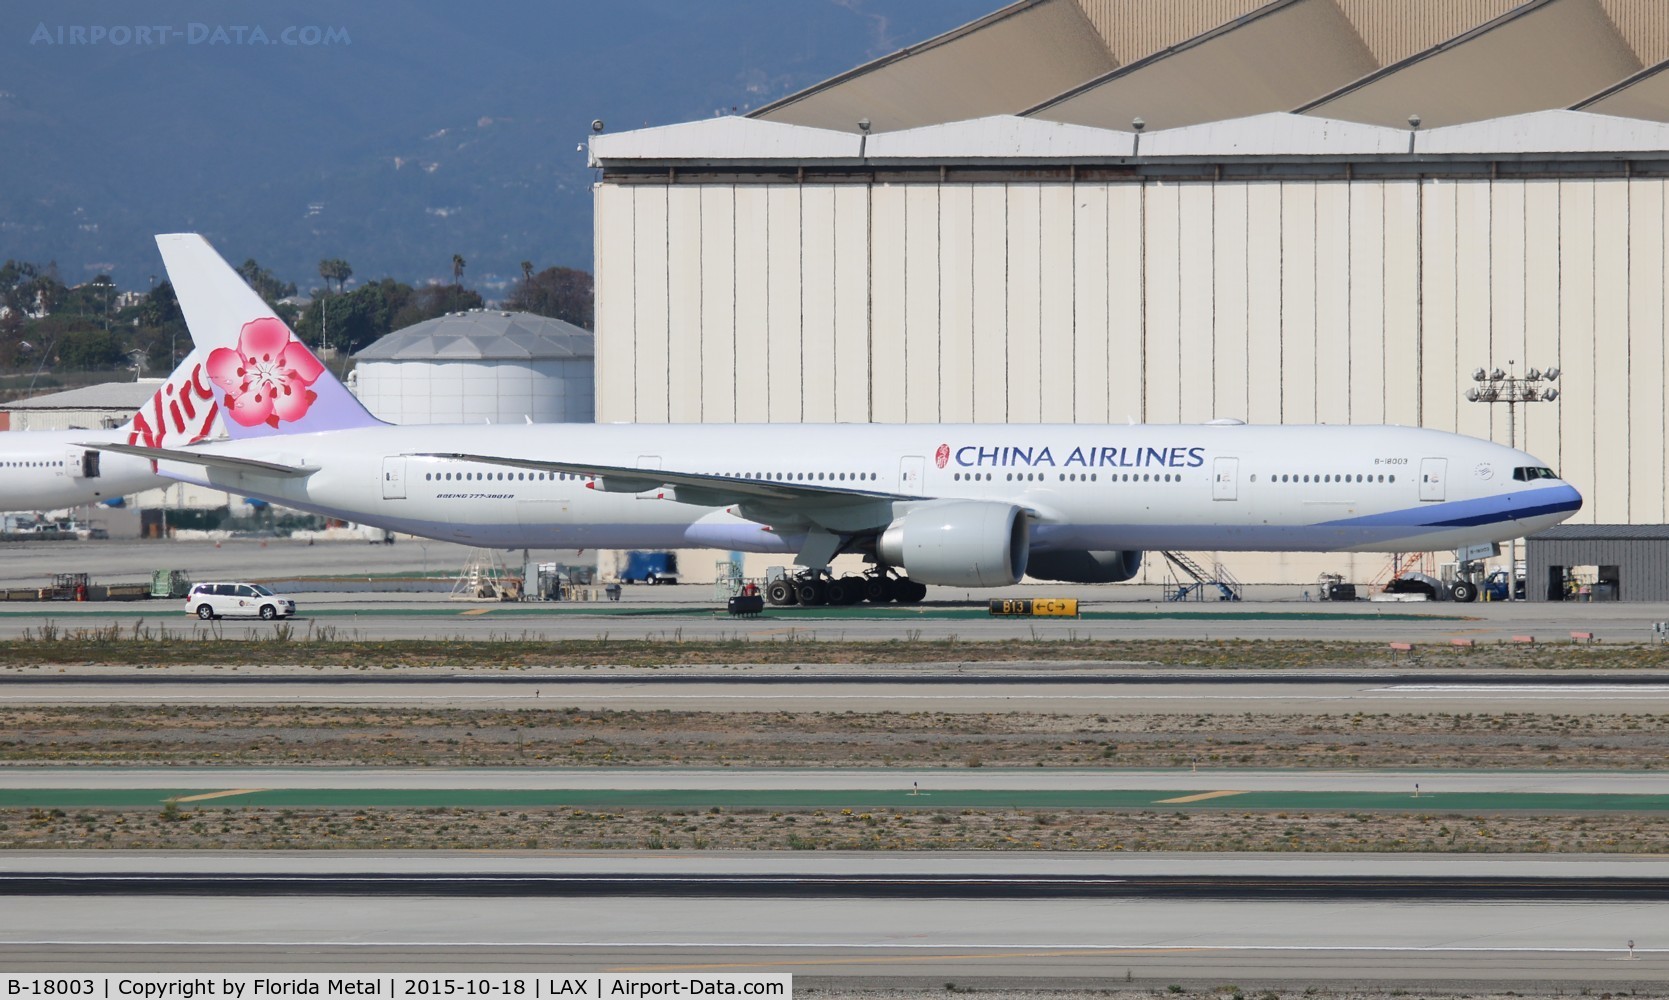 B-18003, 2015 Boeing 777-309/ER C/N 43977, China Airlines